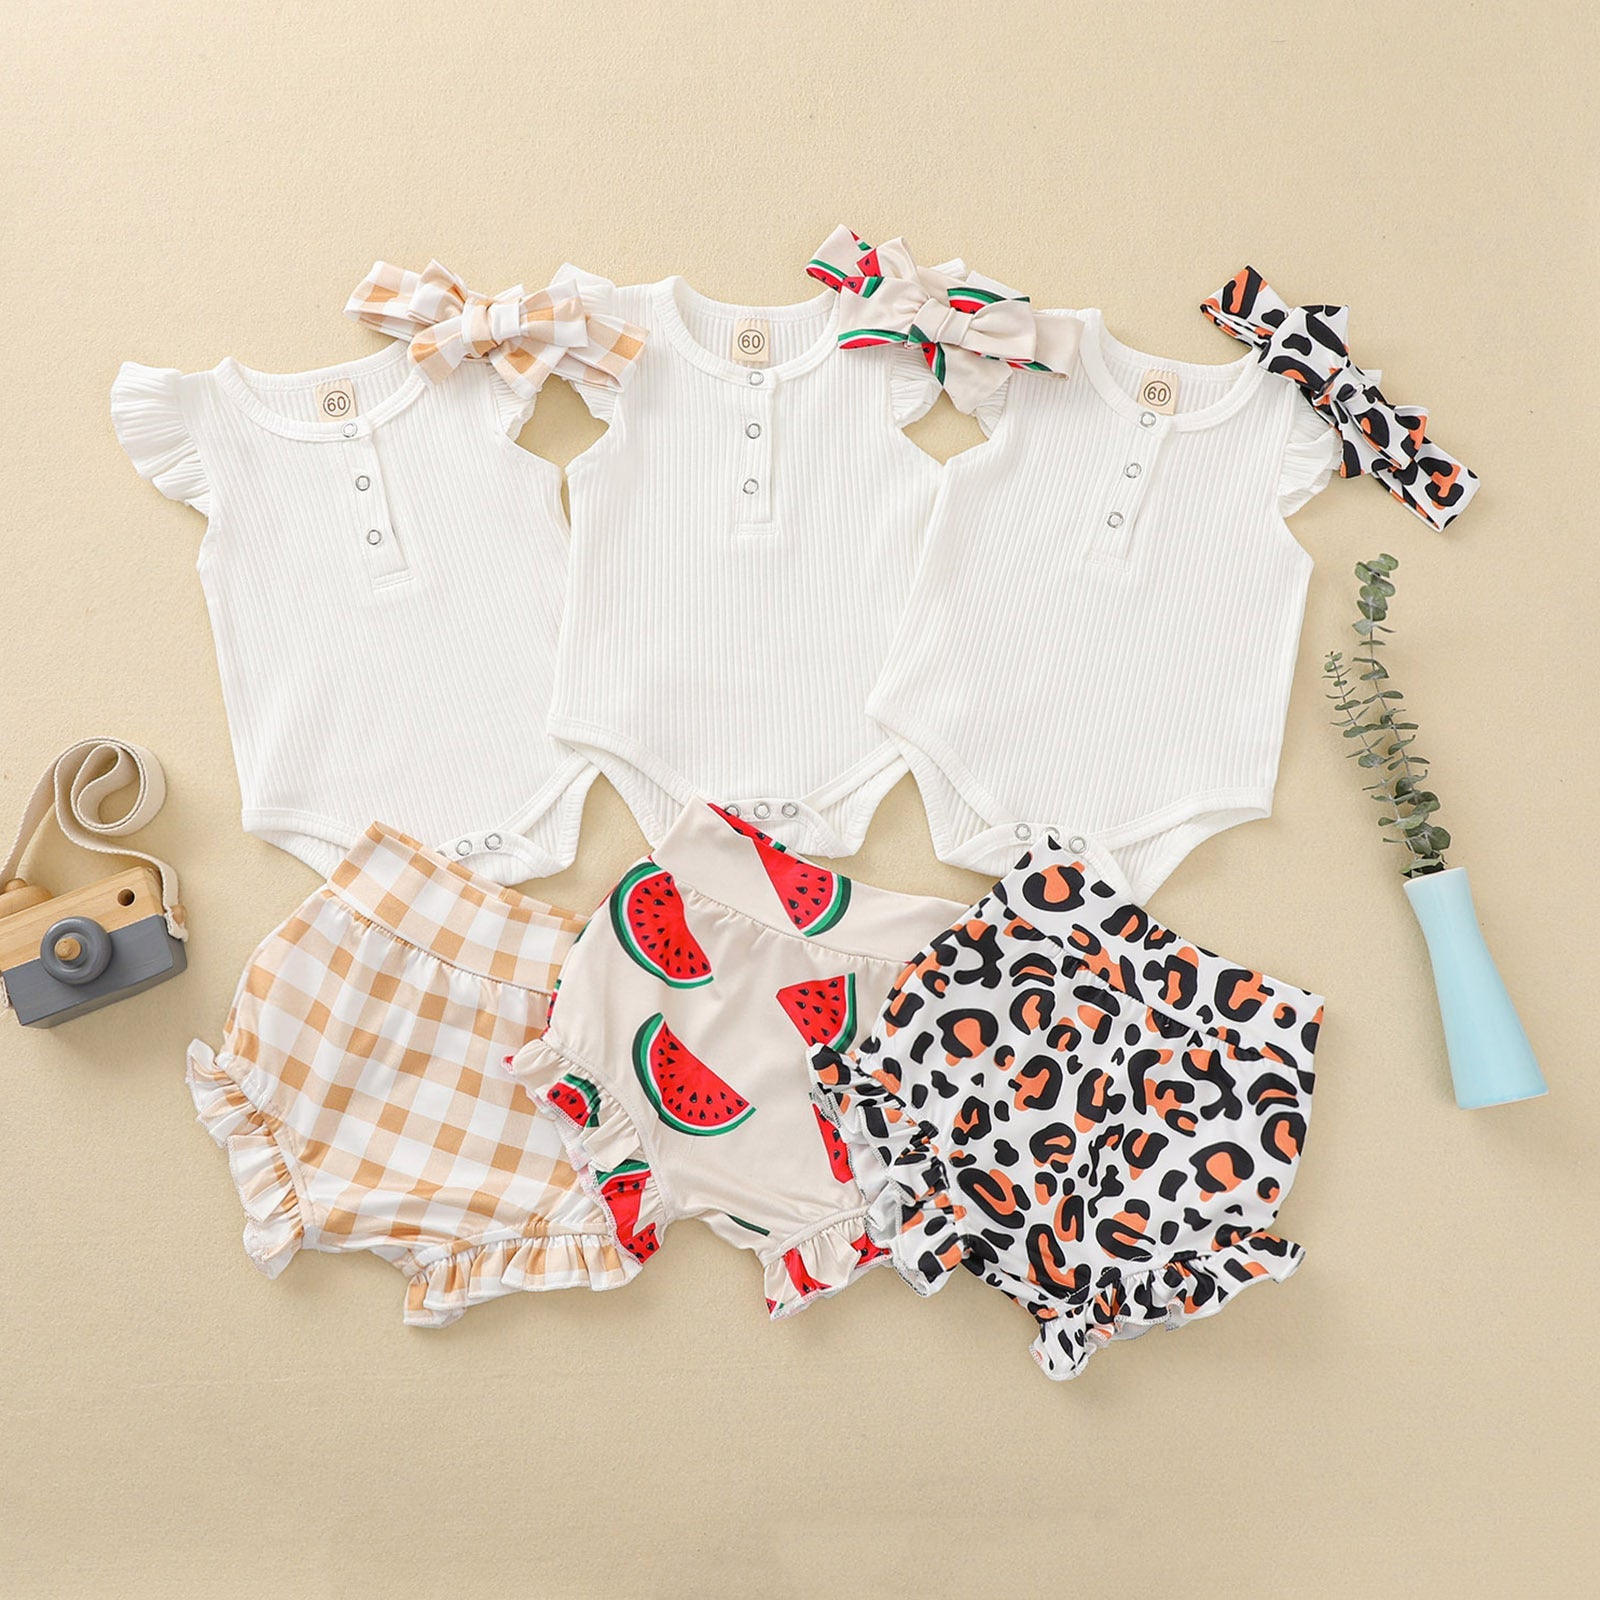 Girls' Baby Suit White Fly Sleeve Top Printed Shorts Three Pieces